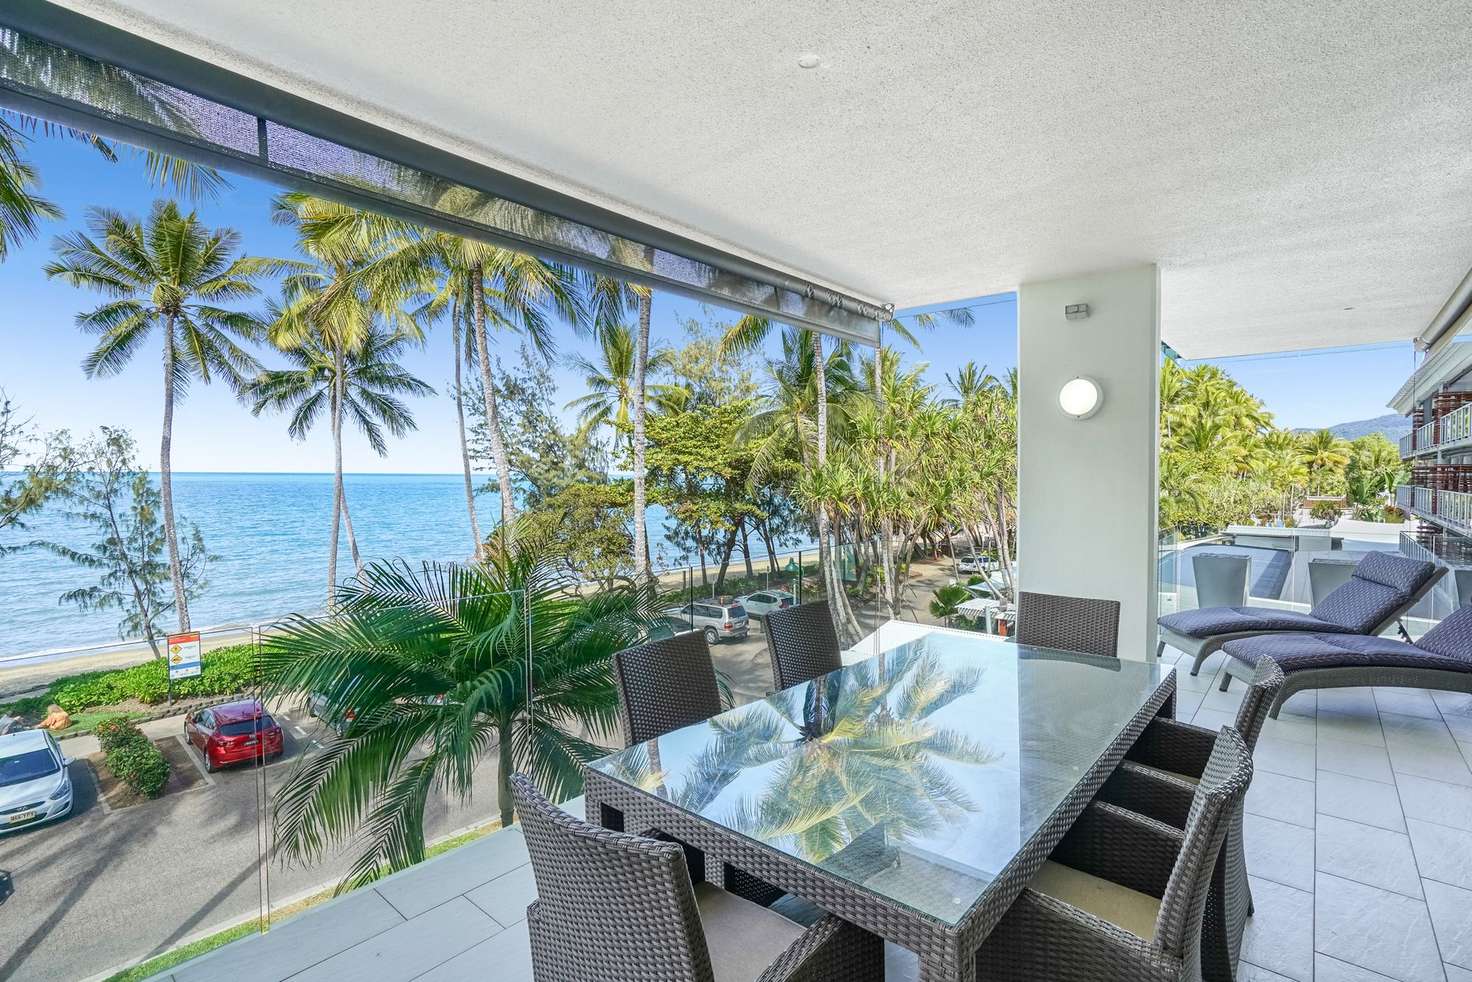 Main view of Homely apartment listing, 5302/2-22 Veivers Road, Palm Cove QLD 4879